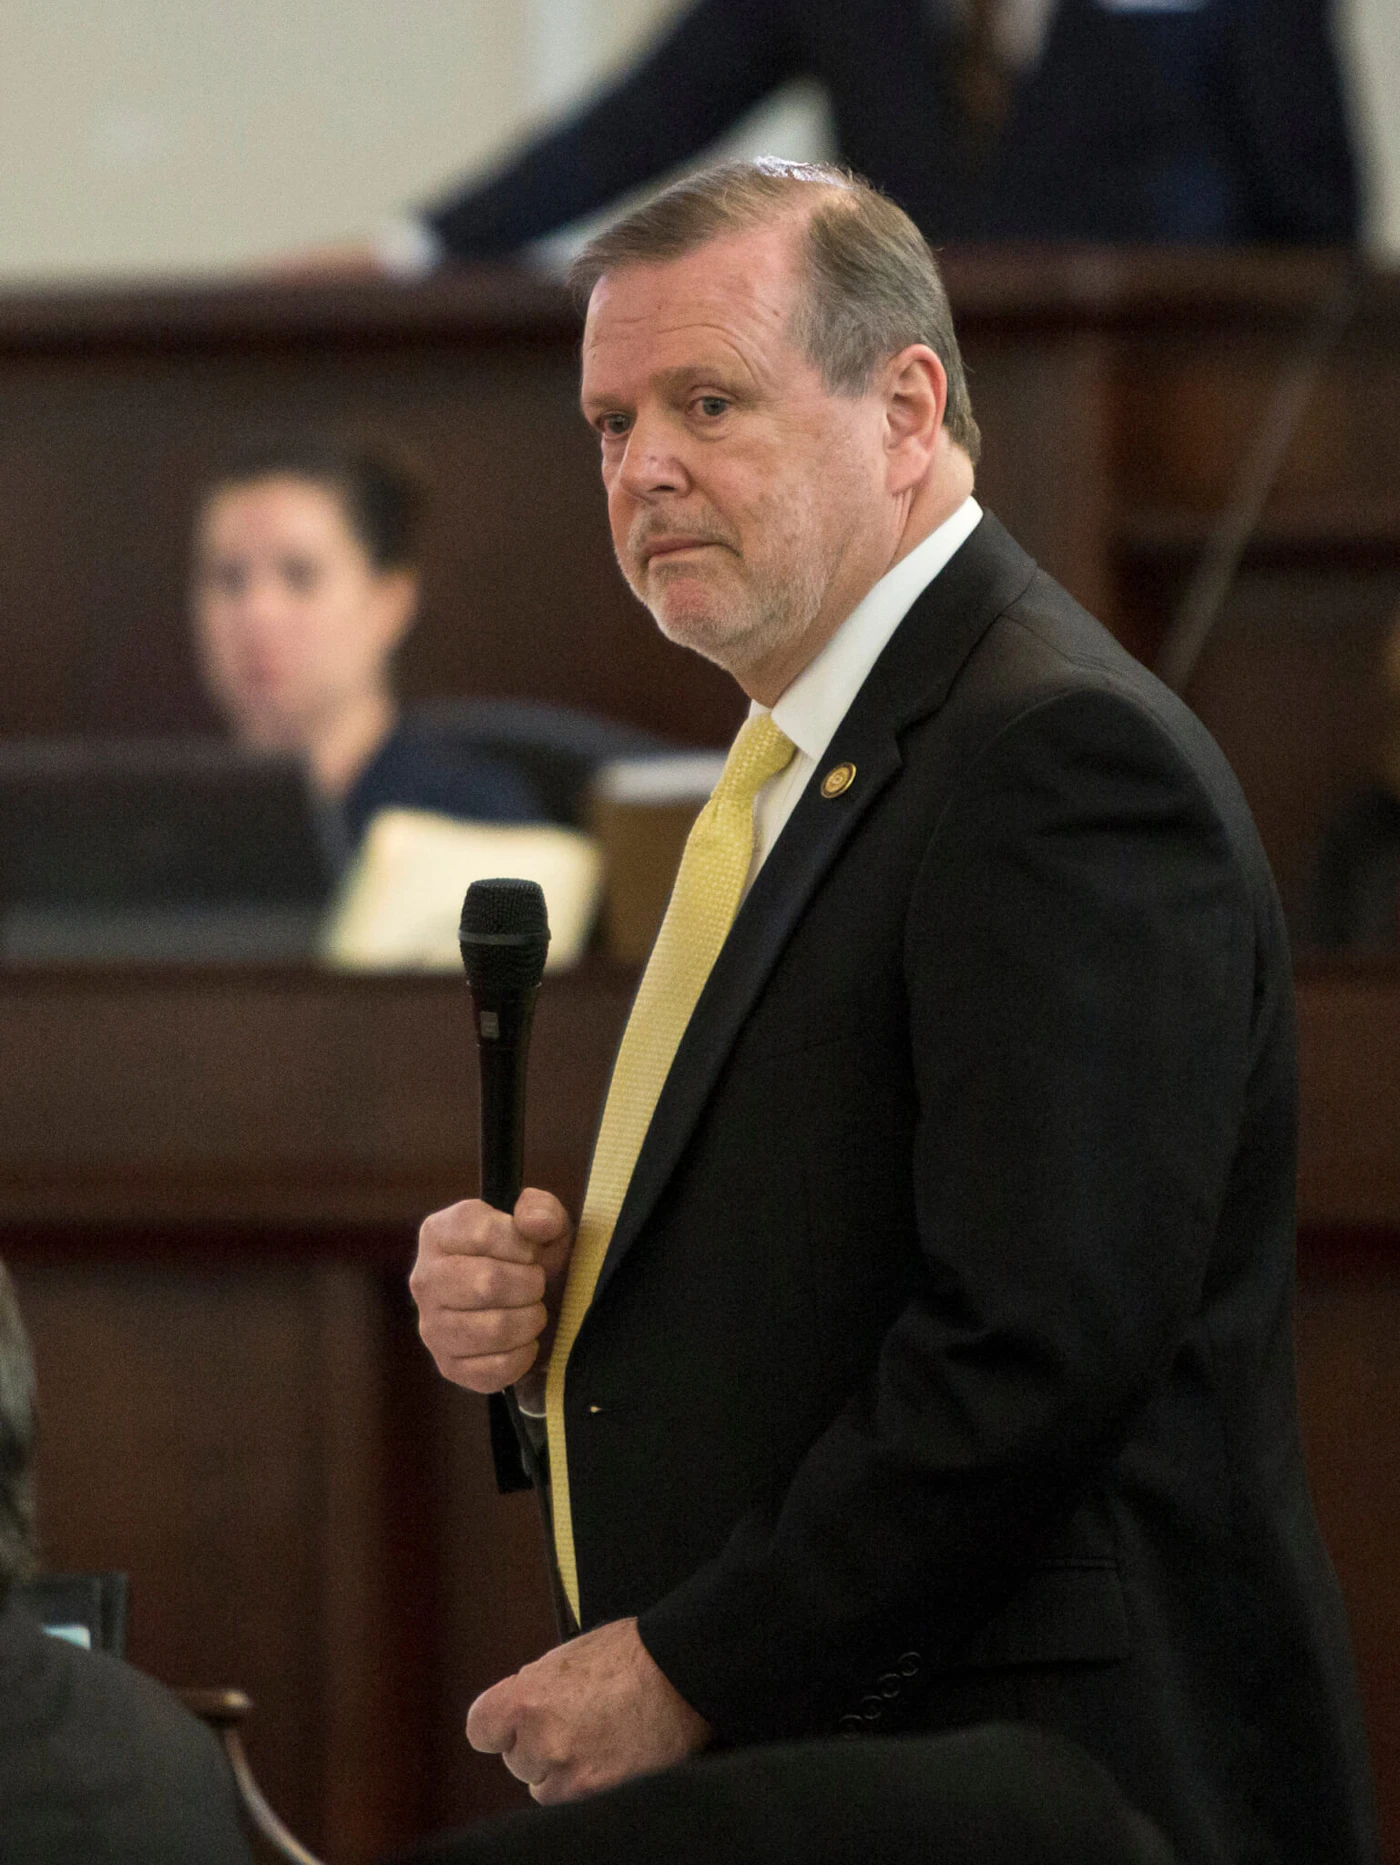 State Sen. Phil Berger speaks on the Senate floor in 2016. Medicaid expansion has re-emerged behind the scenes in the NC House, but Berger's chamber remains quiet. (AP Photo/Ben McKeown)